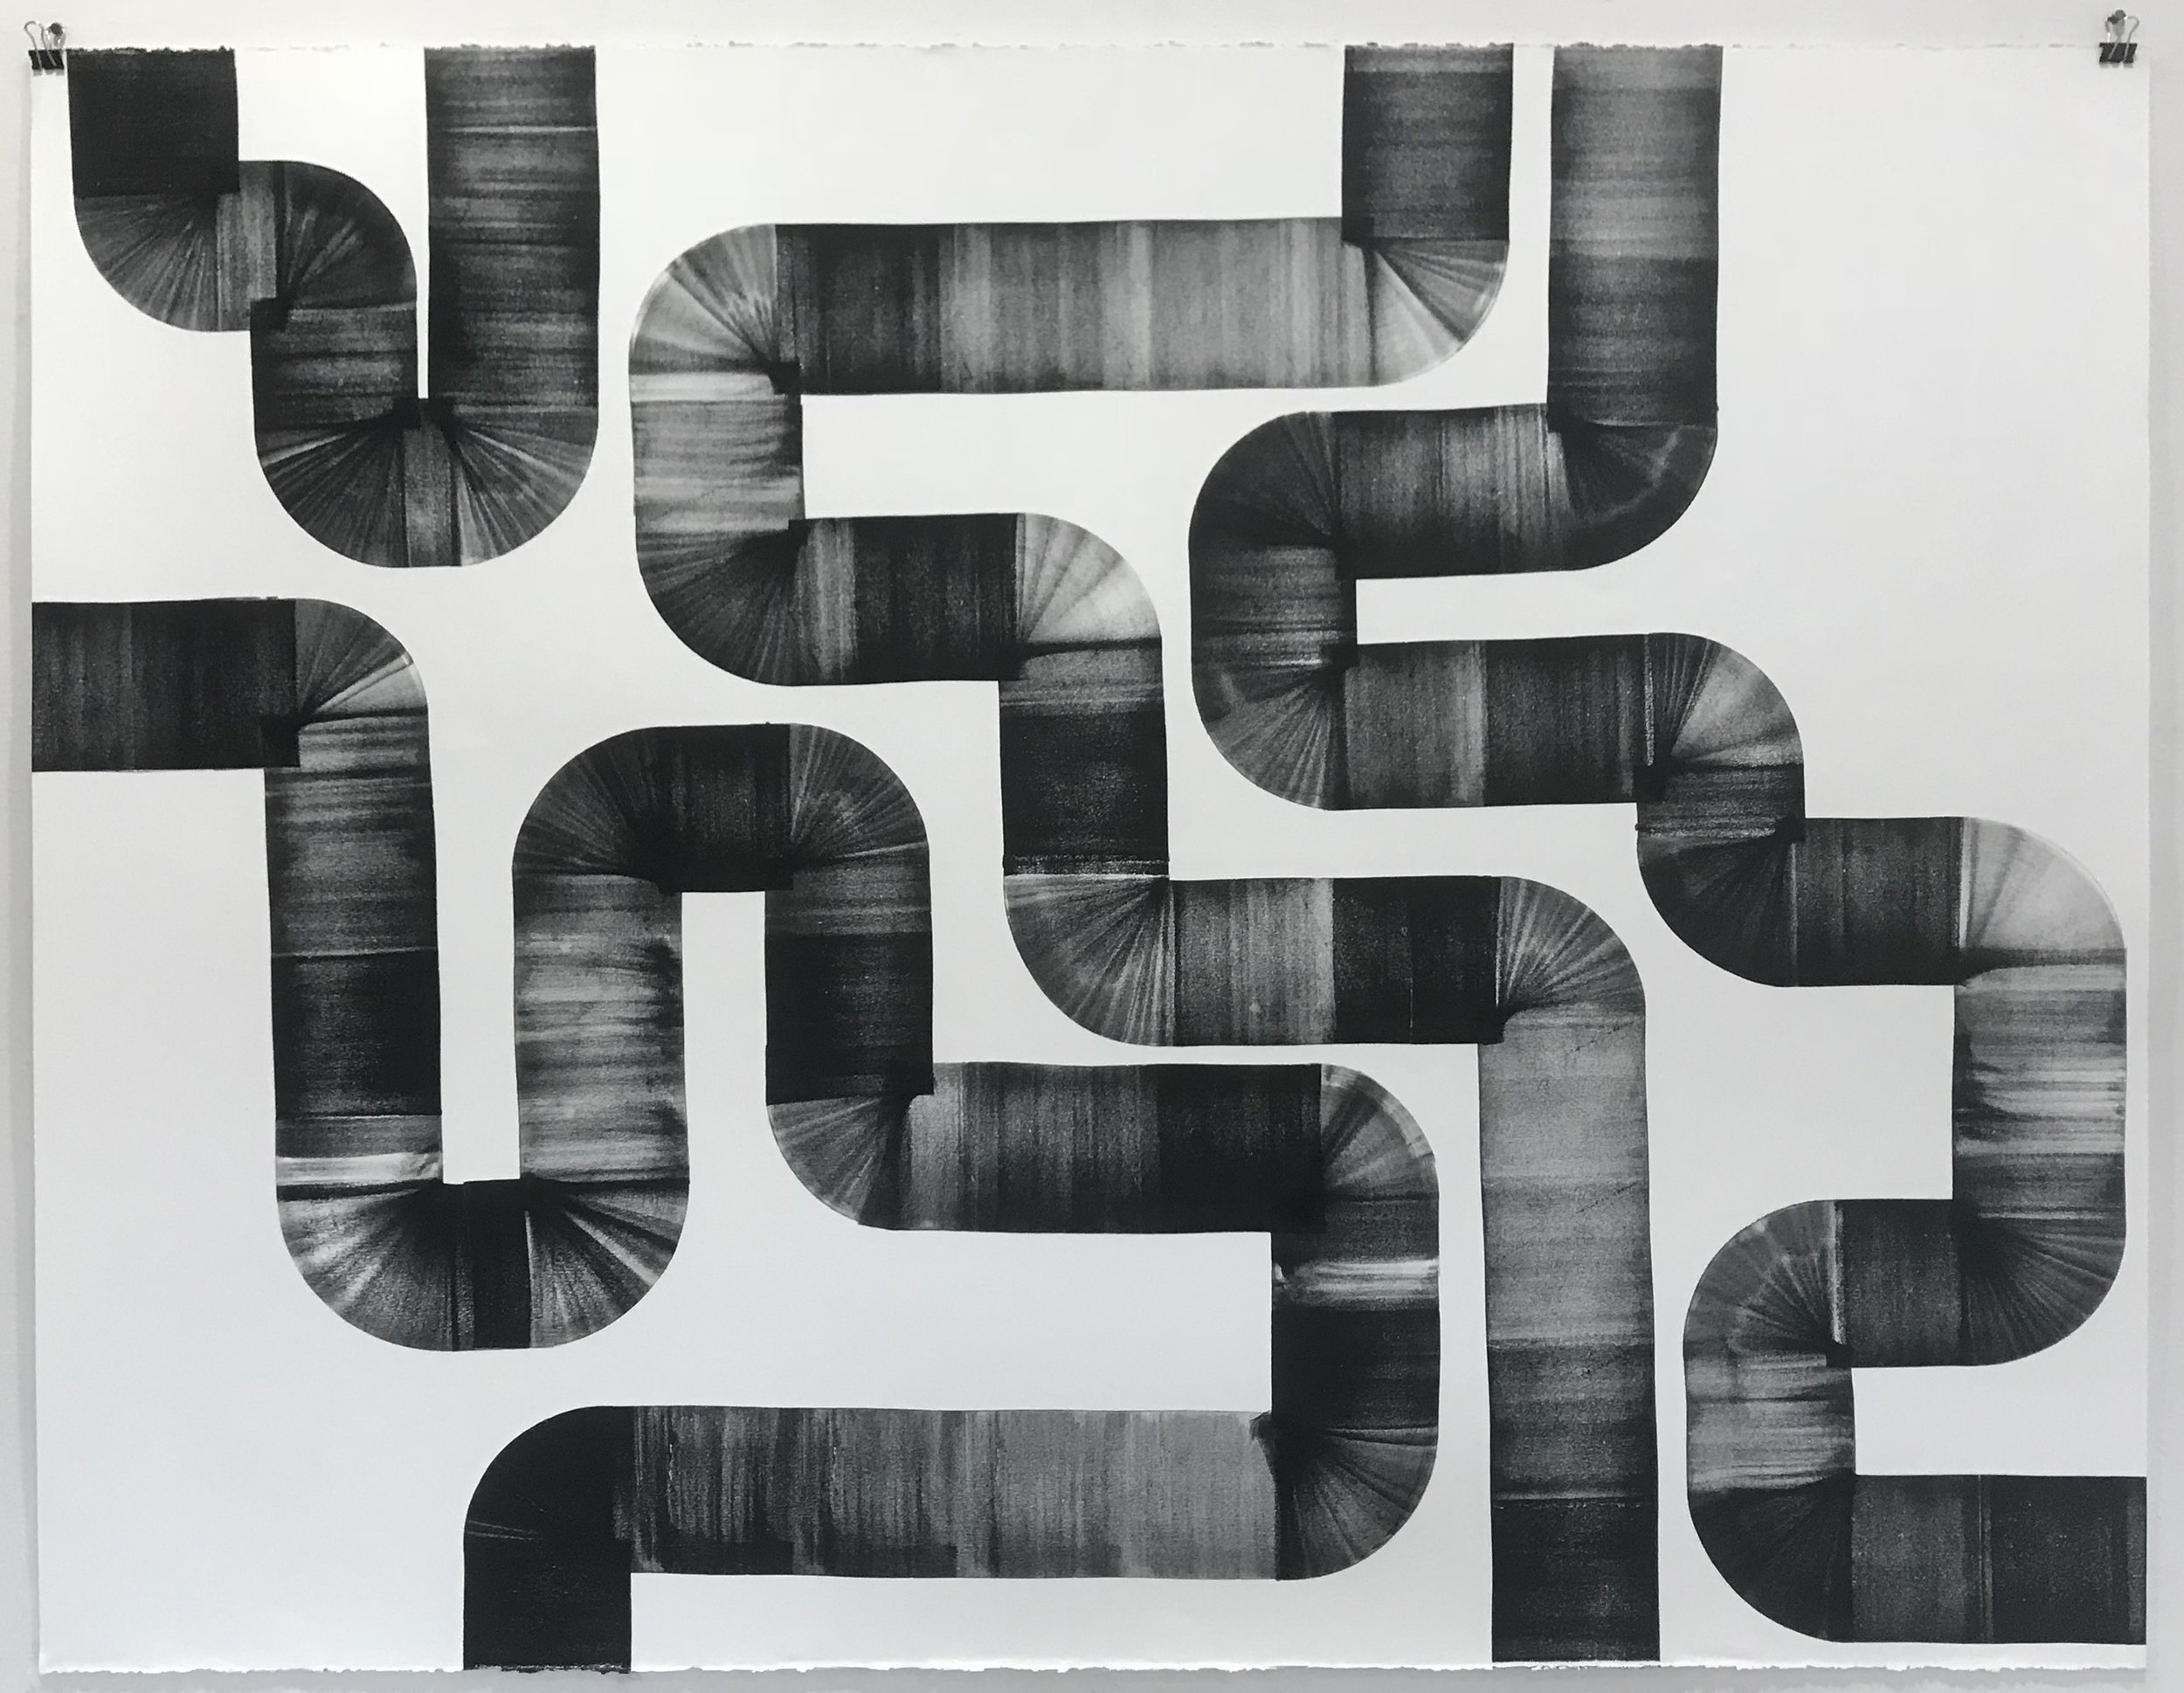  The Plumber Came By and Said the Pipes are Fine, 2018, Litho ink on paper, 38 x 50 inches (unframed) 